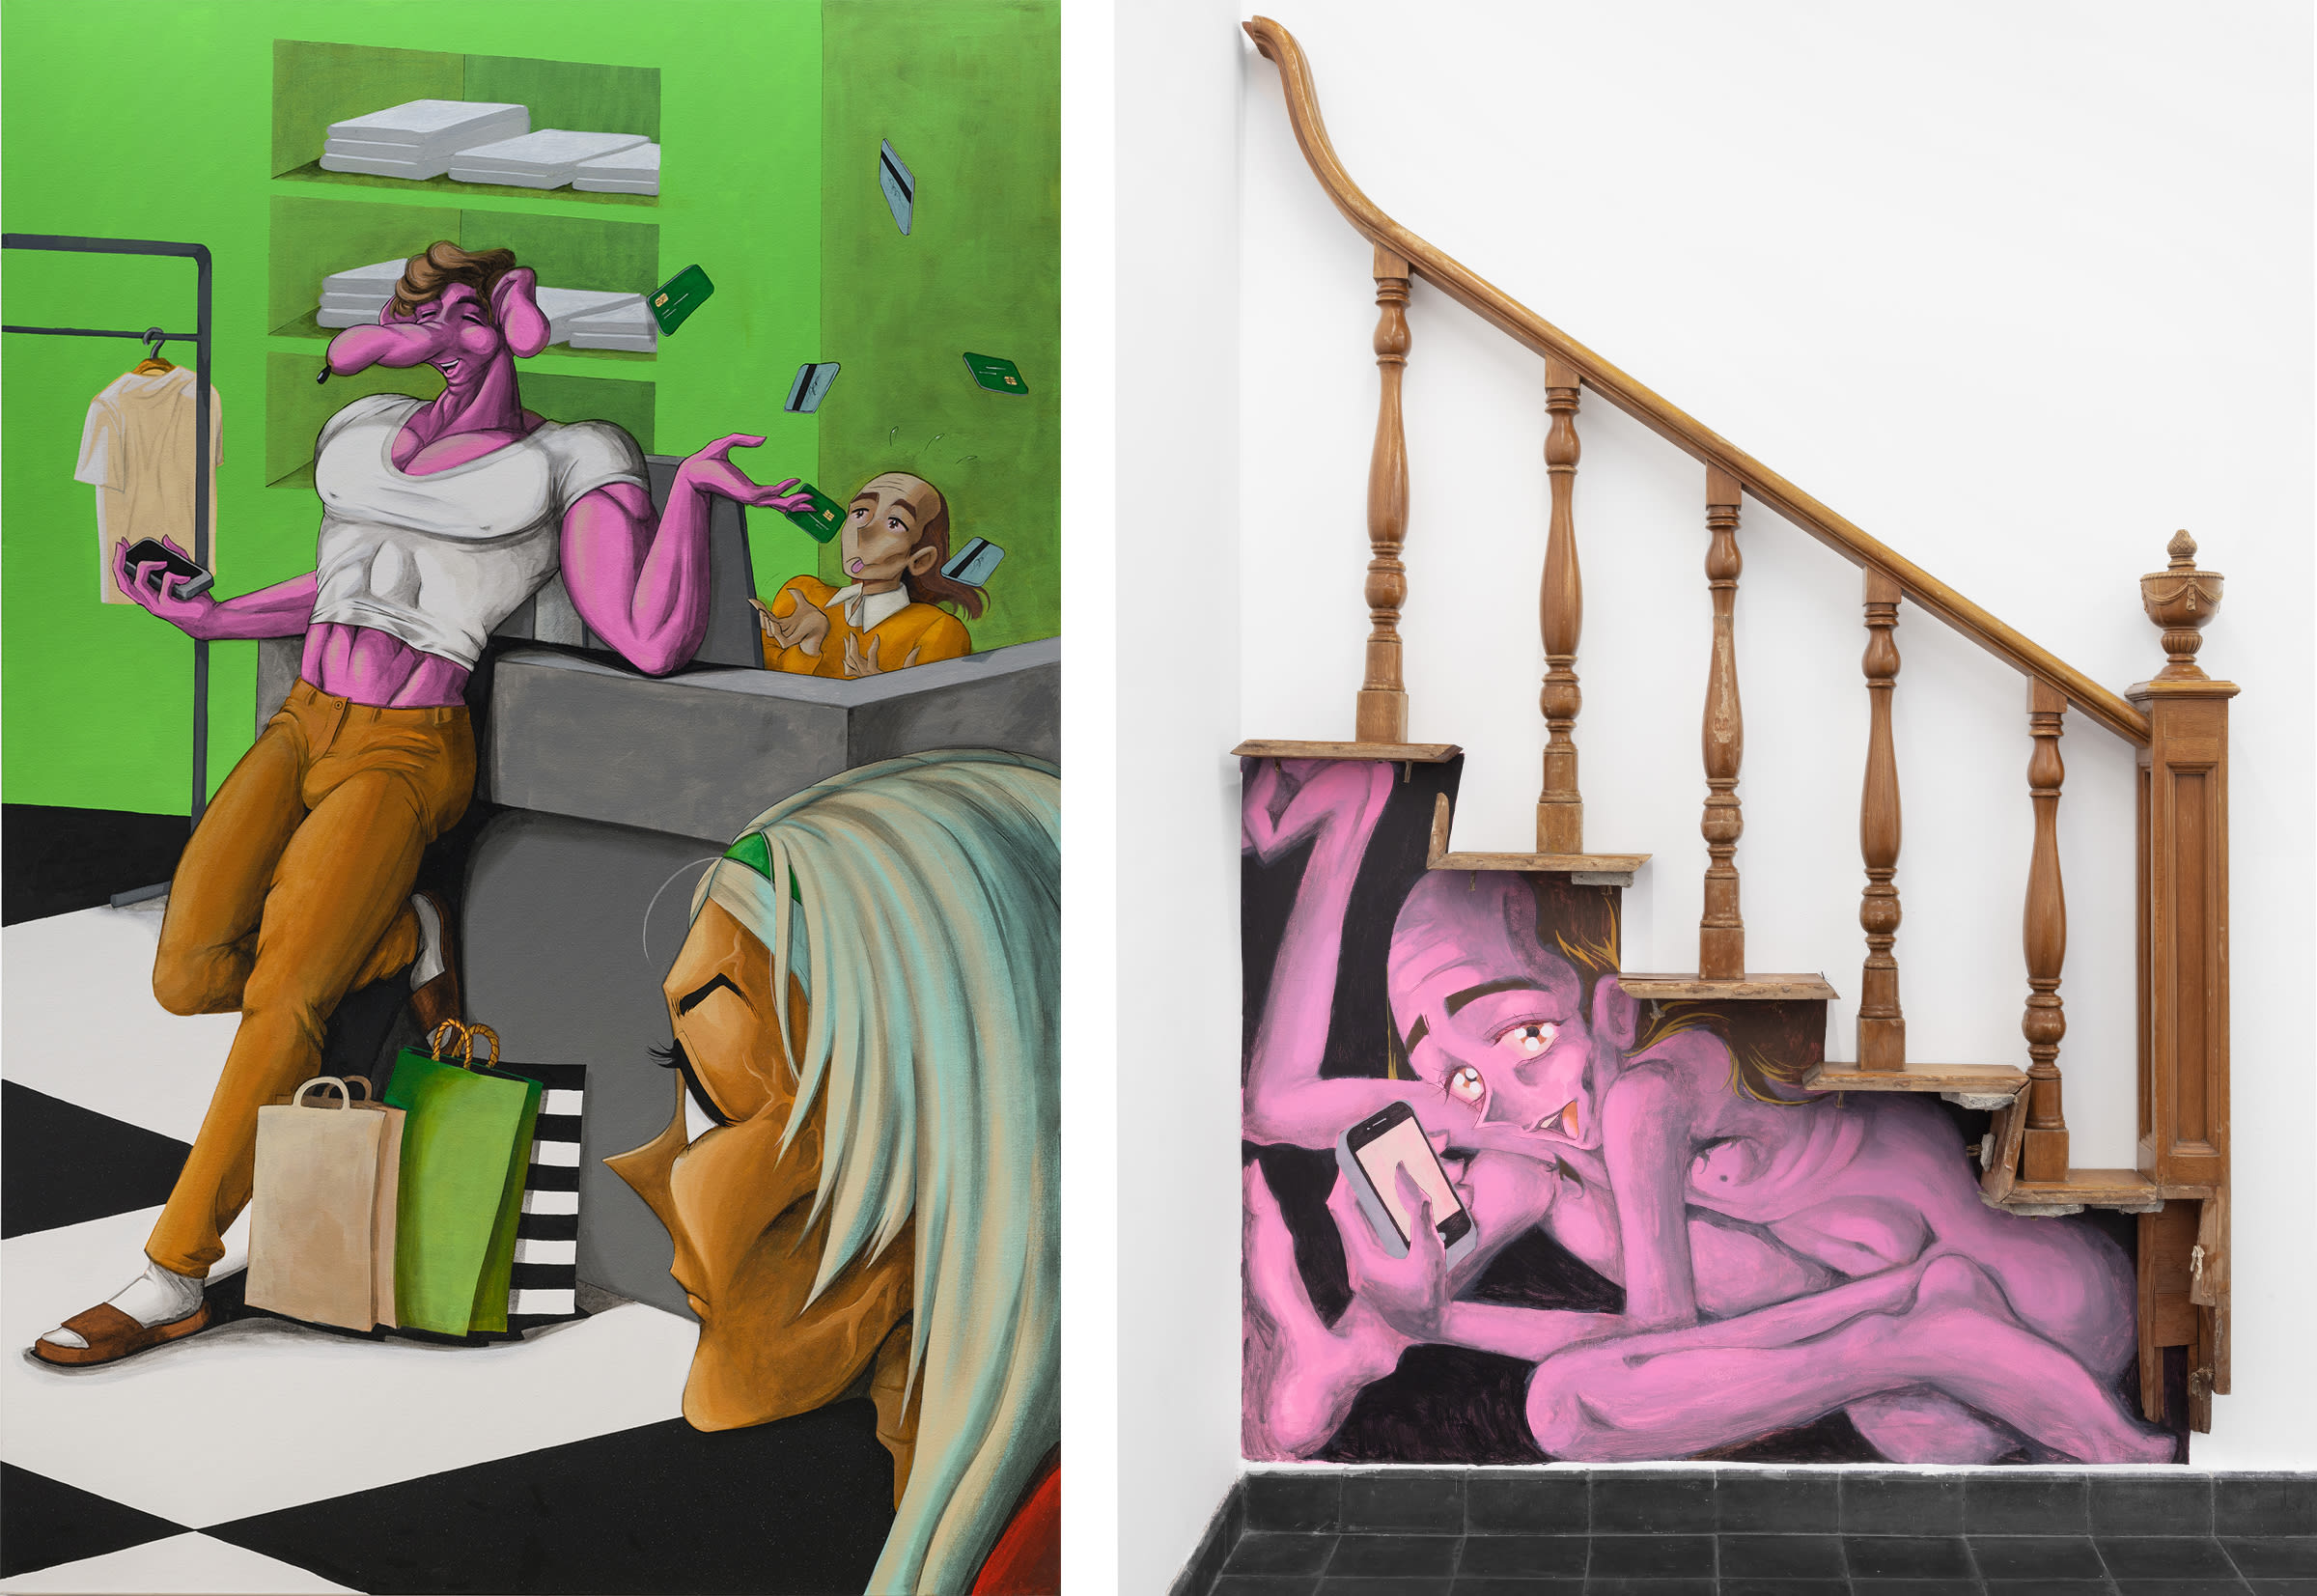 Left: An Obnoxious Customer, 2021. Courtesy of the artist and Lomex. Right: Closet Under the Stairs, 2019. Photo by Omar Olguin. Courtesy of the artist and Gaga.